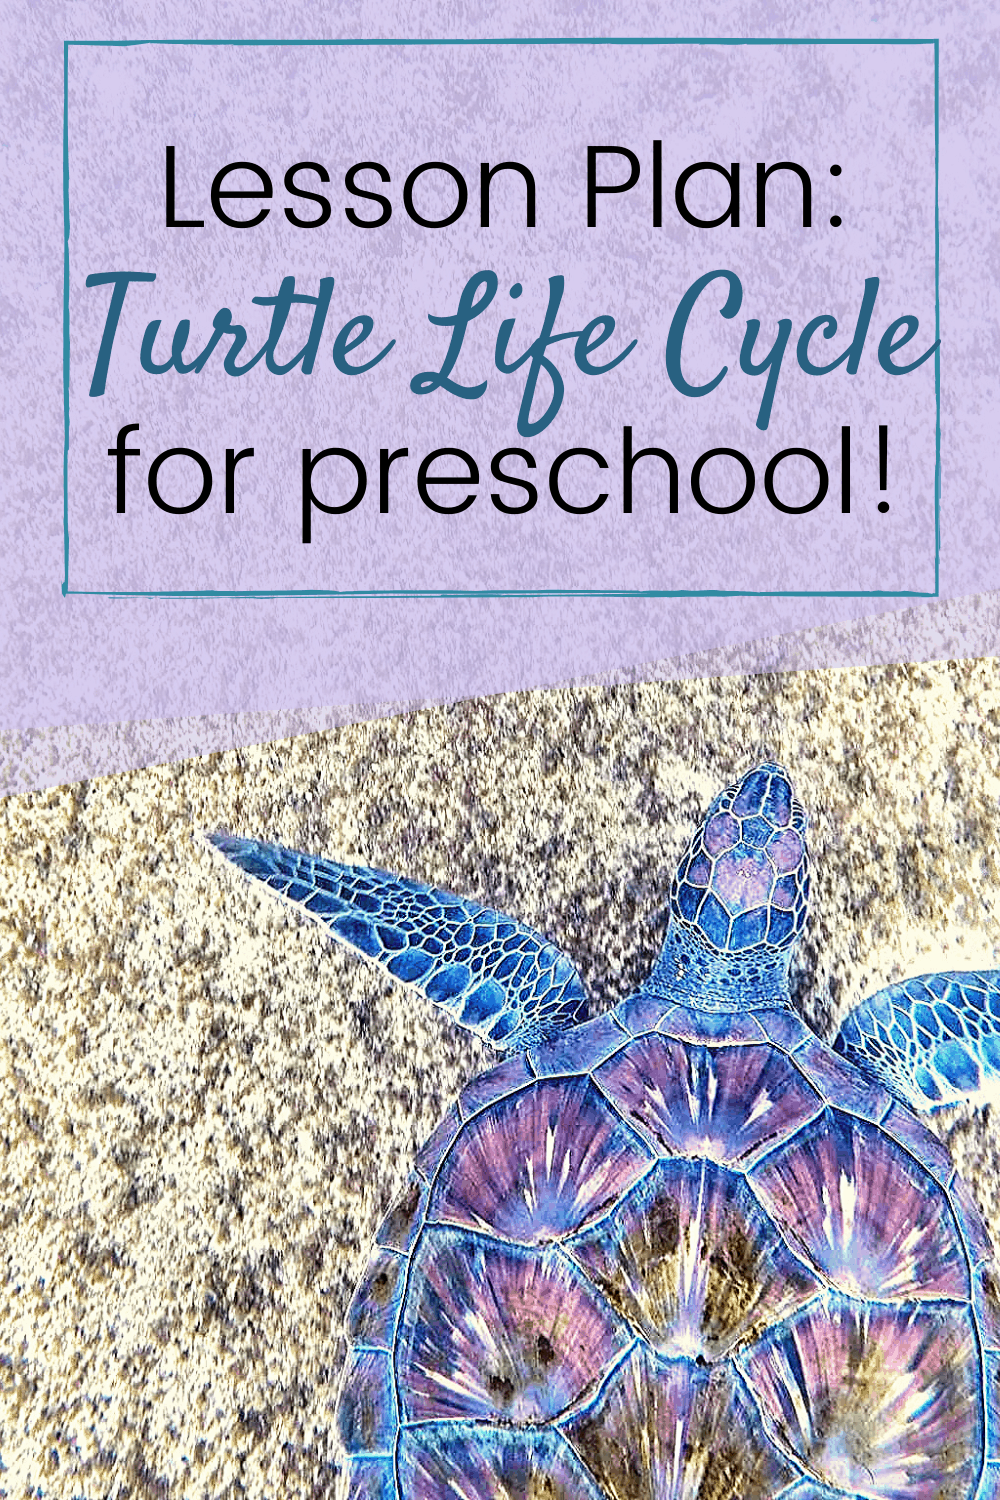 Explore this awesome collection of activities designed to help you teach the life cycle of a turtle for kids. They are perfect for kids ages 3-7!